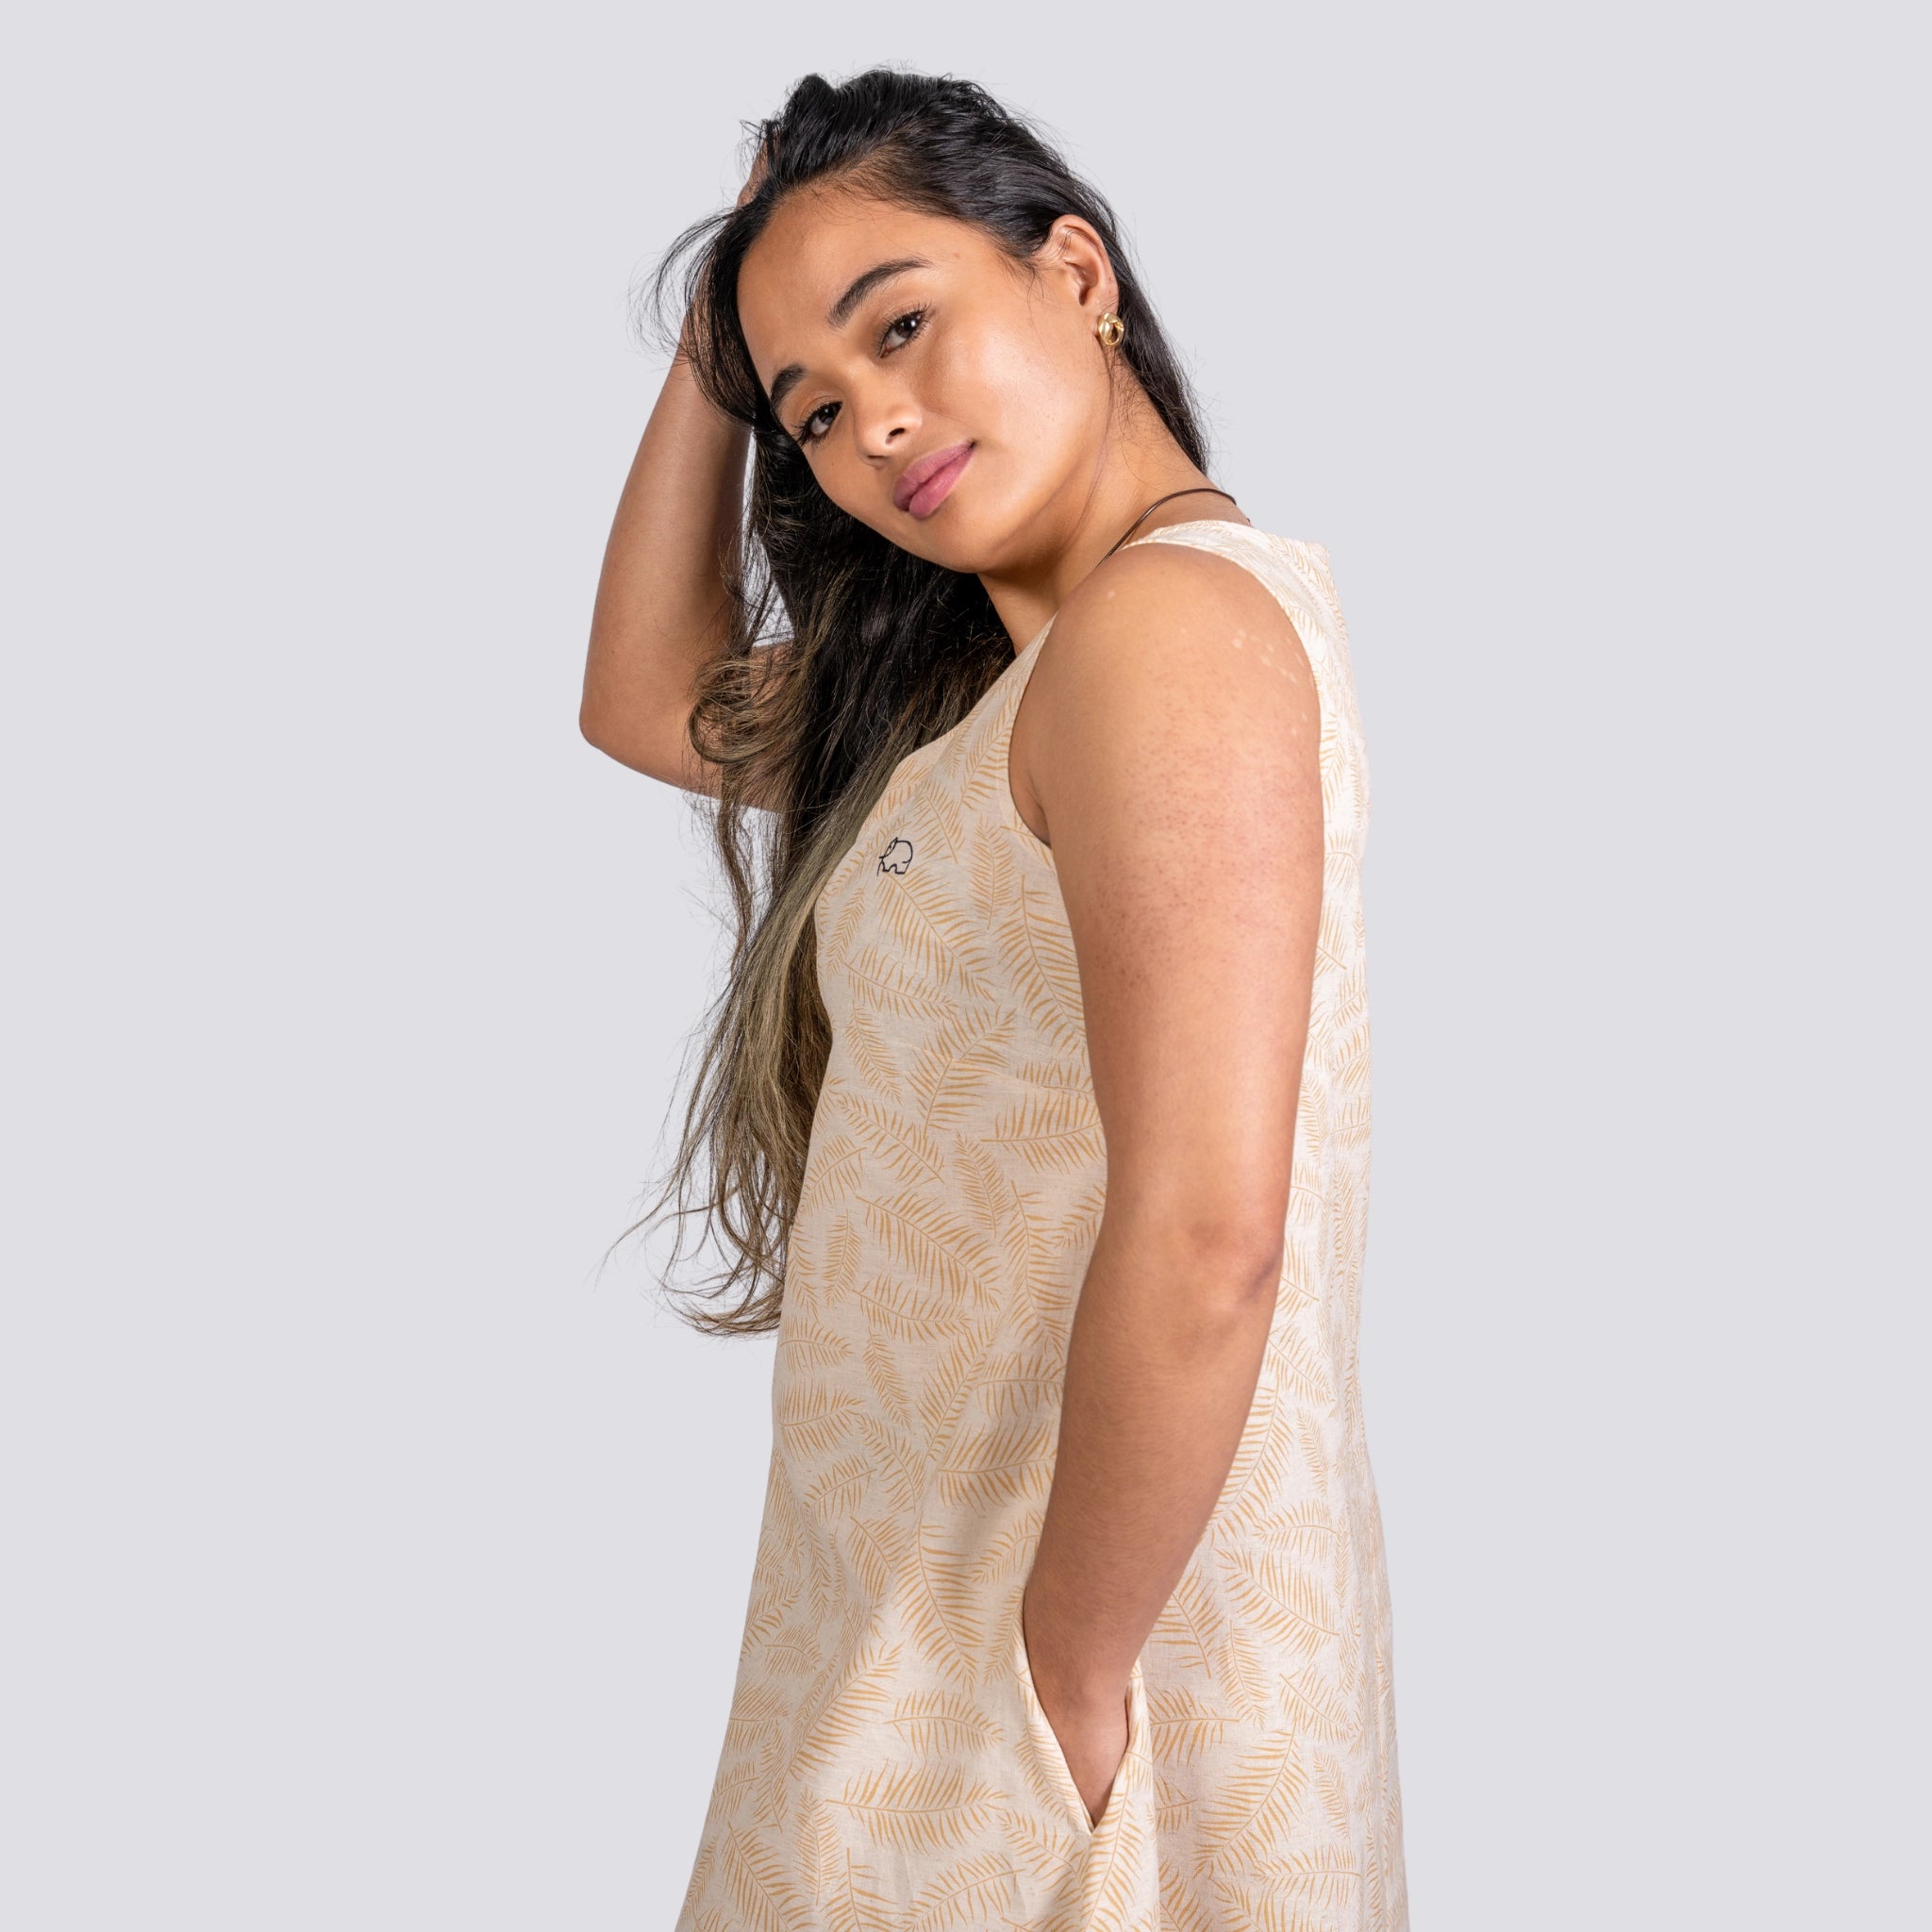 A woman in a beige Karee Mystic Serenity High Low Linen Cotton Midi Dress with a subtle leaf pattern looks over her shoulder against a plain gray background.